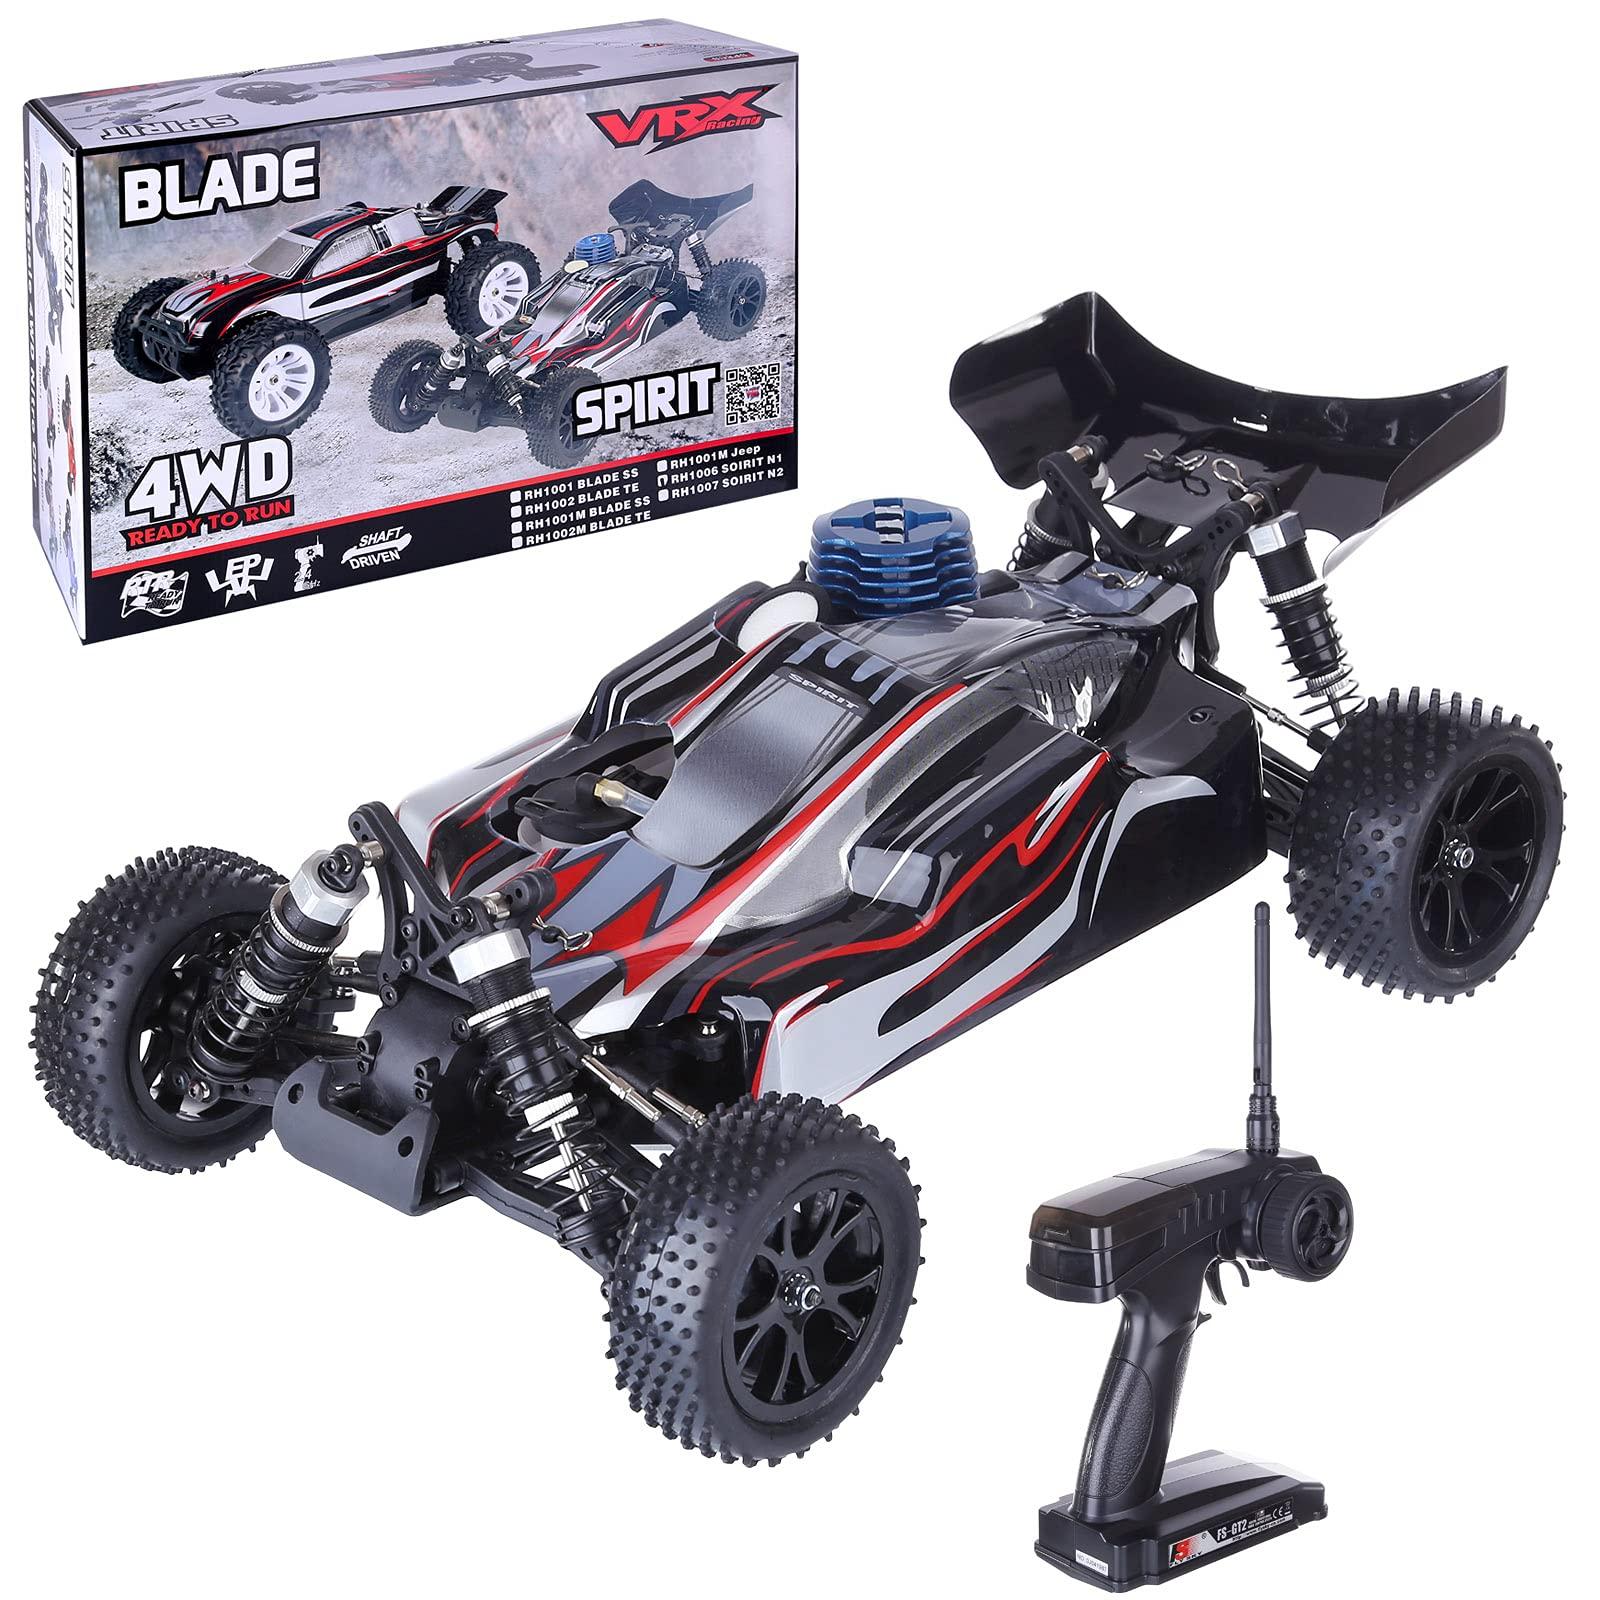 Nitro Rc Race Buggy: Enhance Your Nitro RC Race Buggy: Tips for Advanced Users